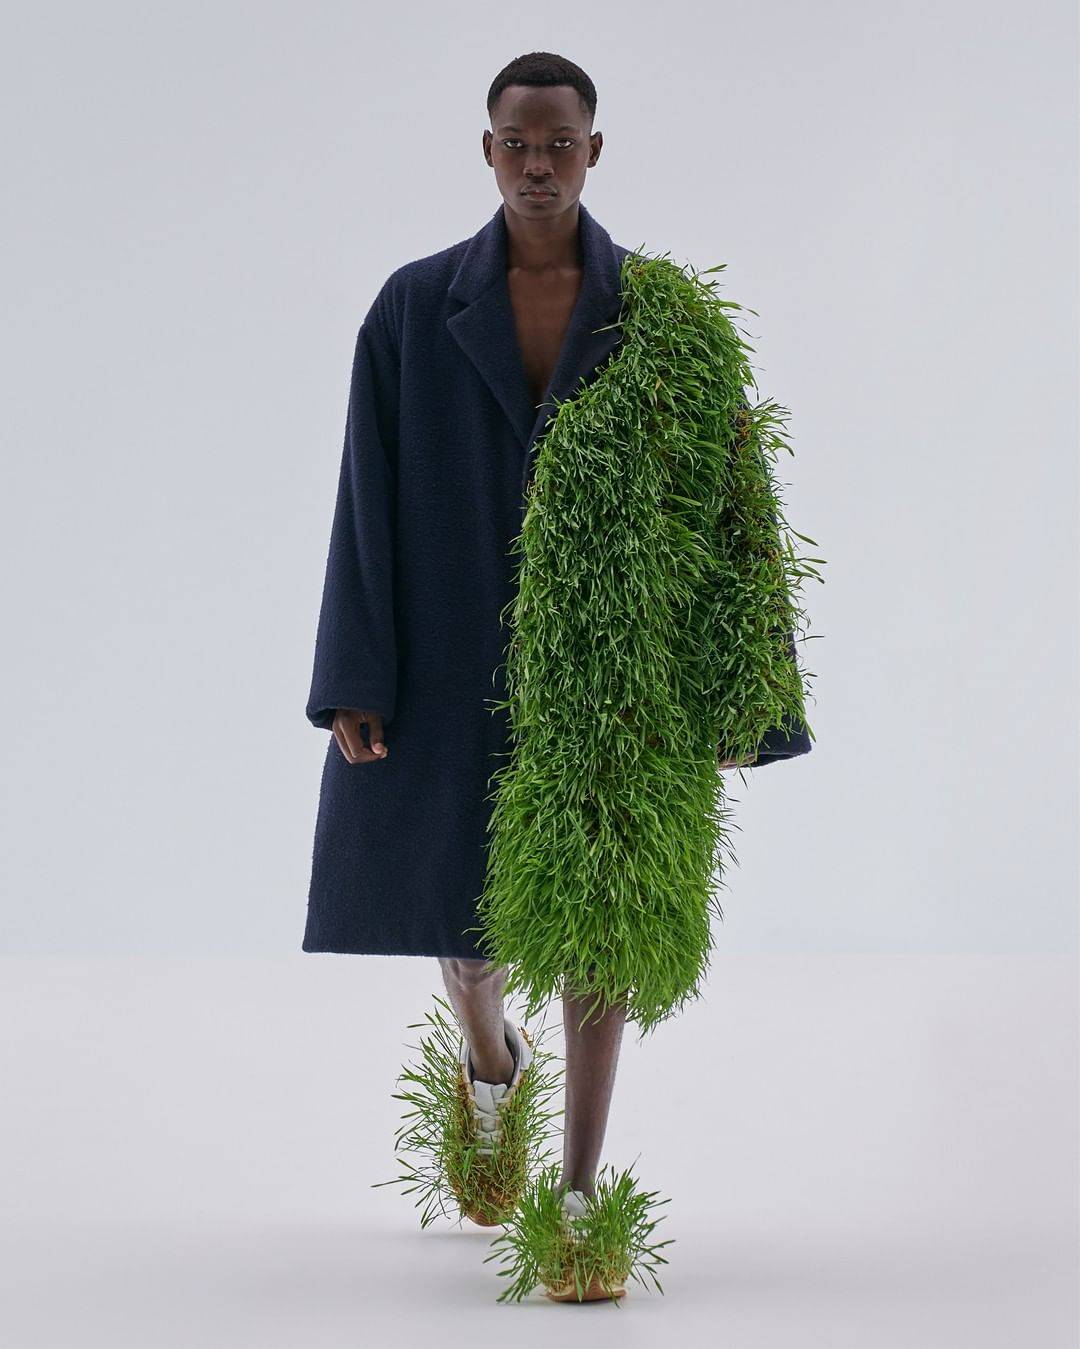 Jonathan Anderson, the creative director for Loewe, designed a collection that fuses technology and nature, showcasing garments that feature living plants